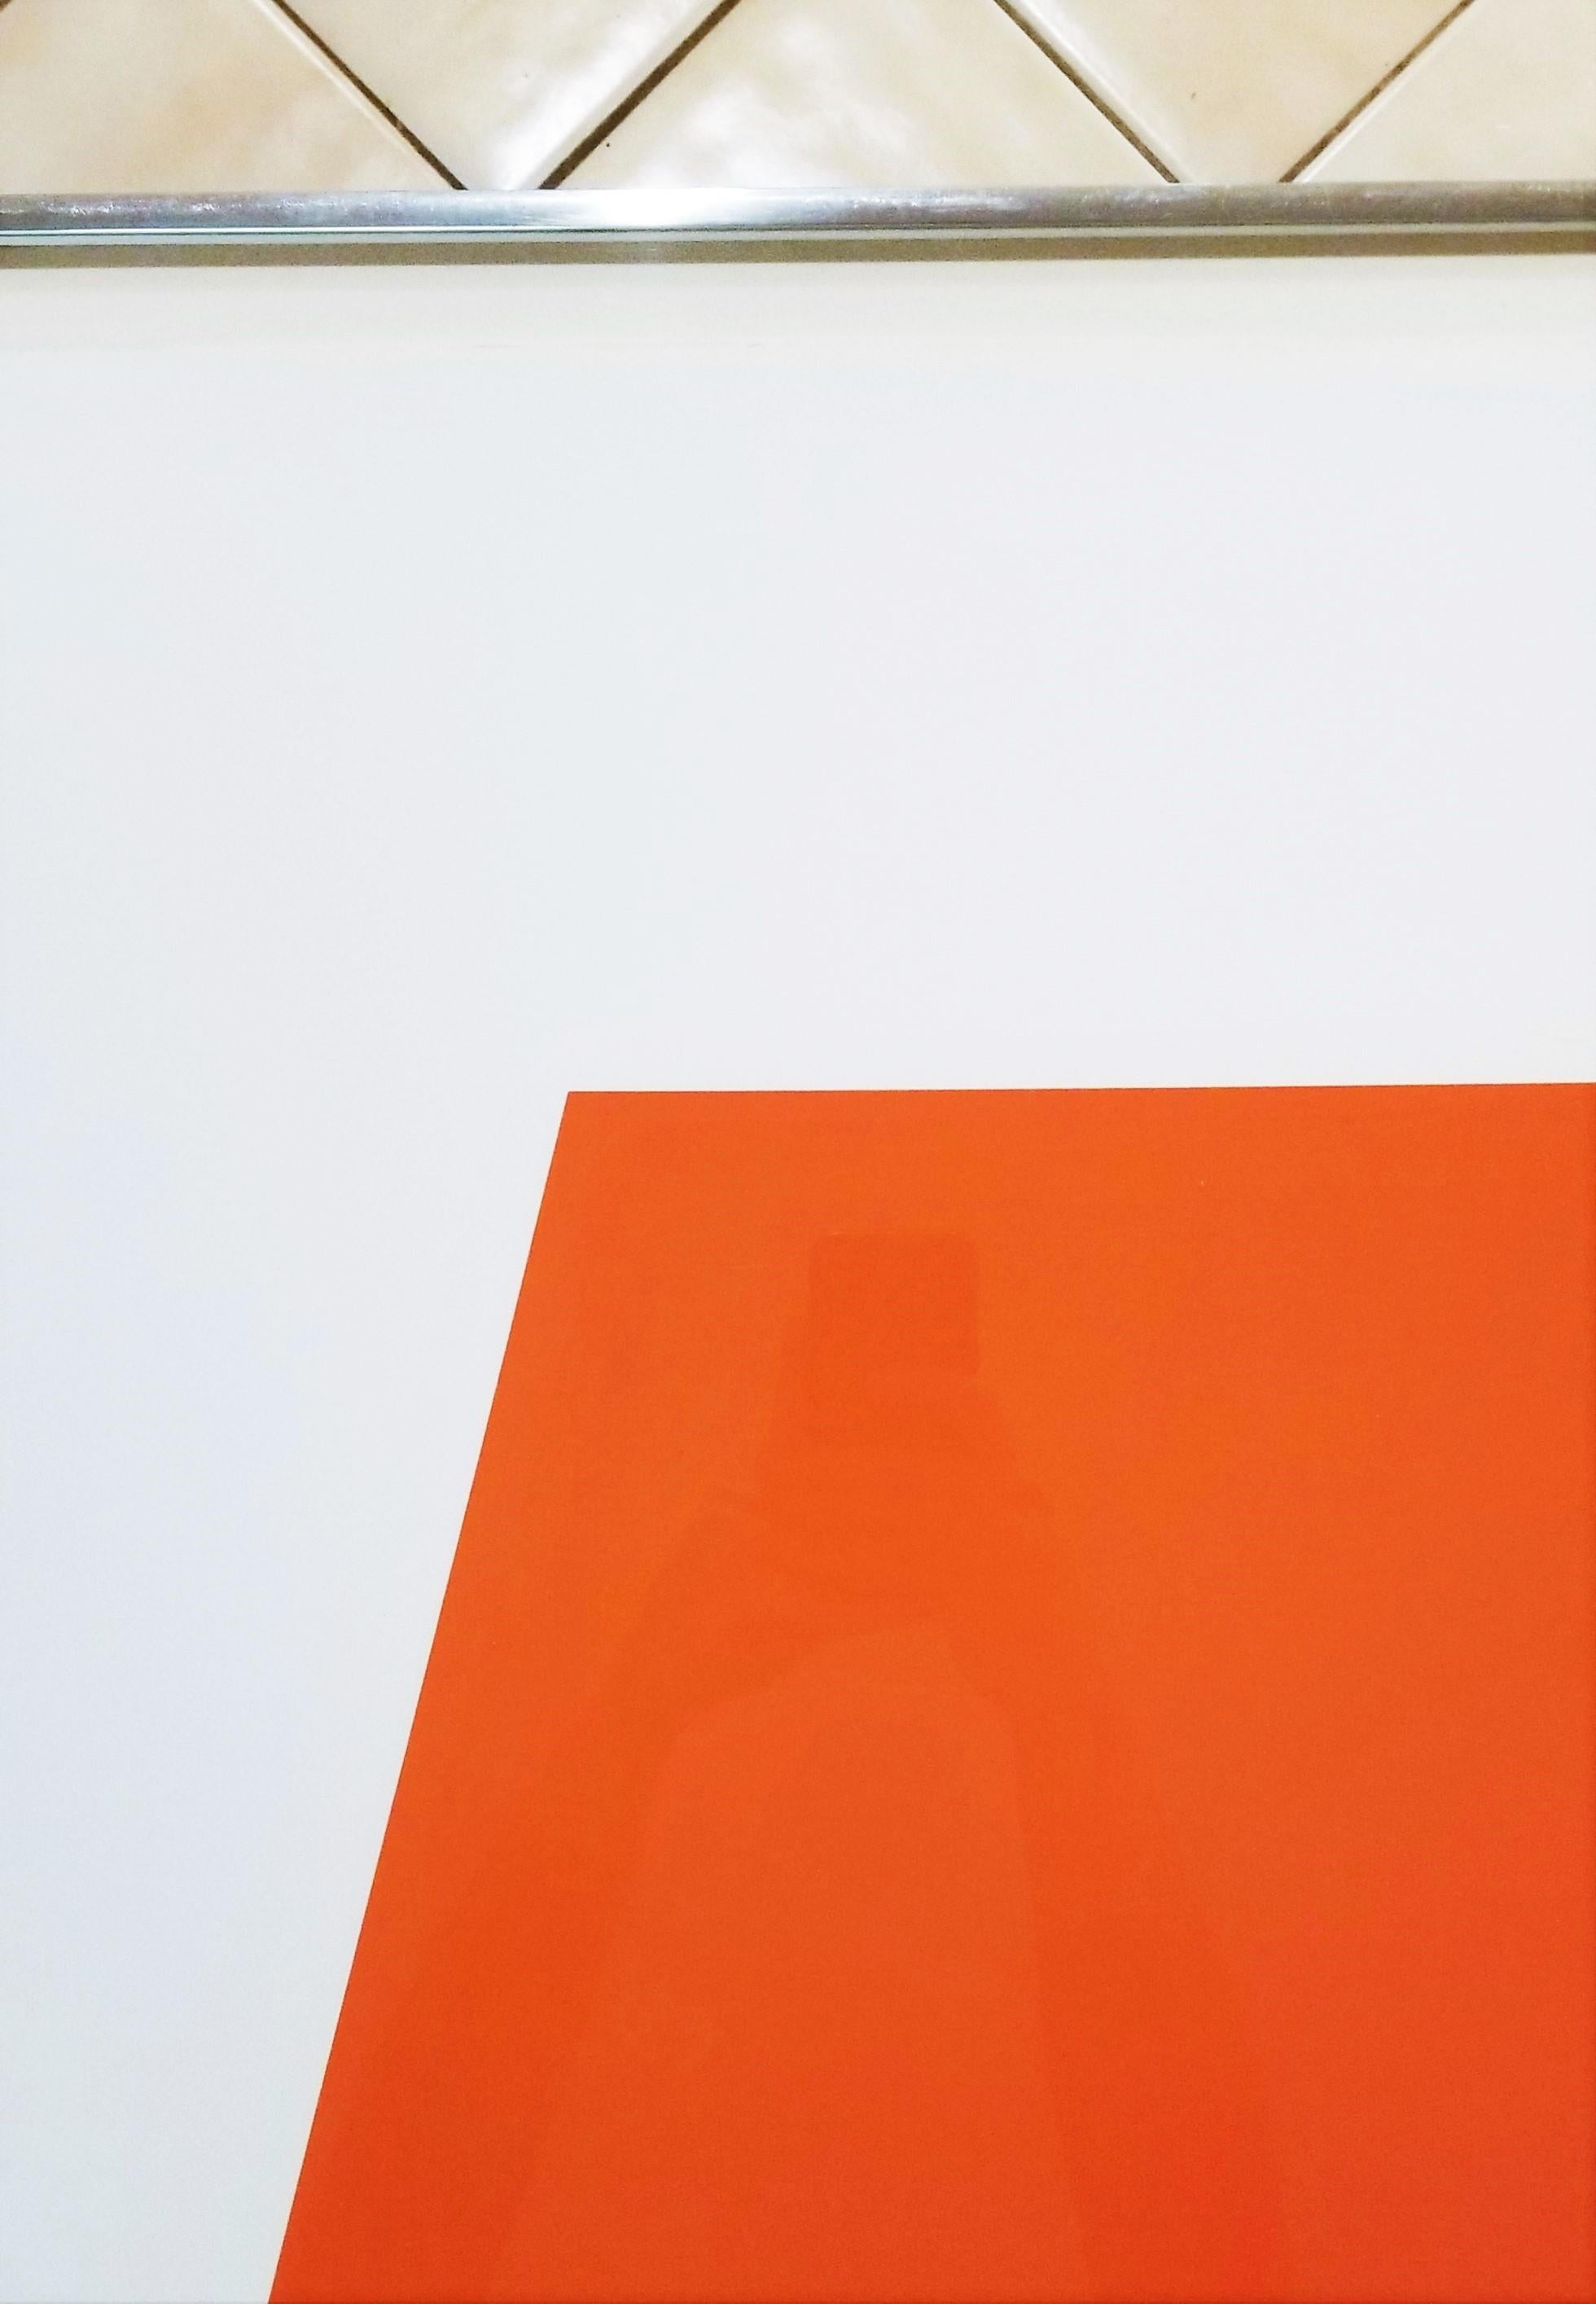 Artist: Ellsworth Kelly (American, 1923-2015)
Title: “Orange/Green” 
Portfolio: Series of Ten Lithographs
*Signed by Kelly in pencil lower right
Year: 1970
Medium: Original Lithograph on Special Arjomari paper
Limited edition: 75/75. (There were